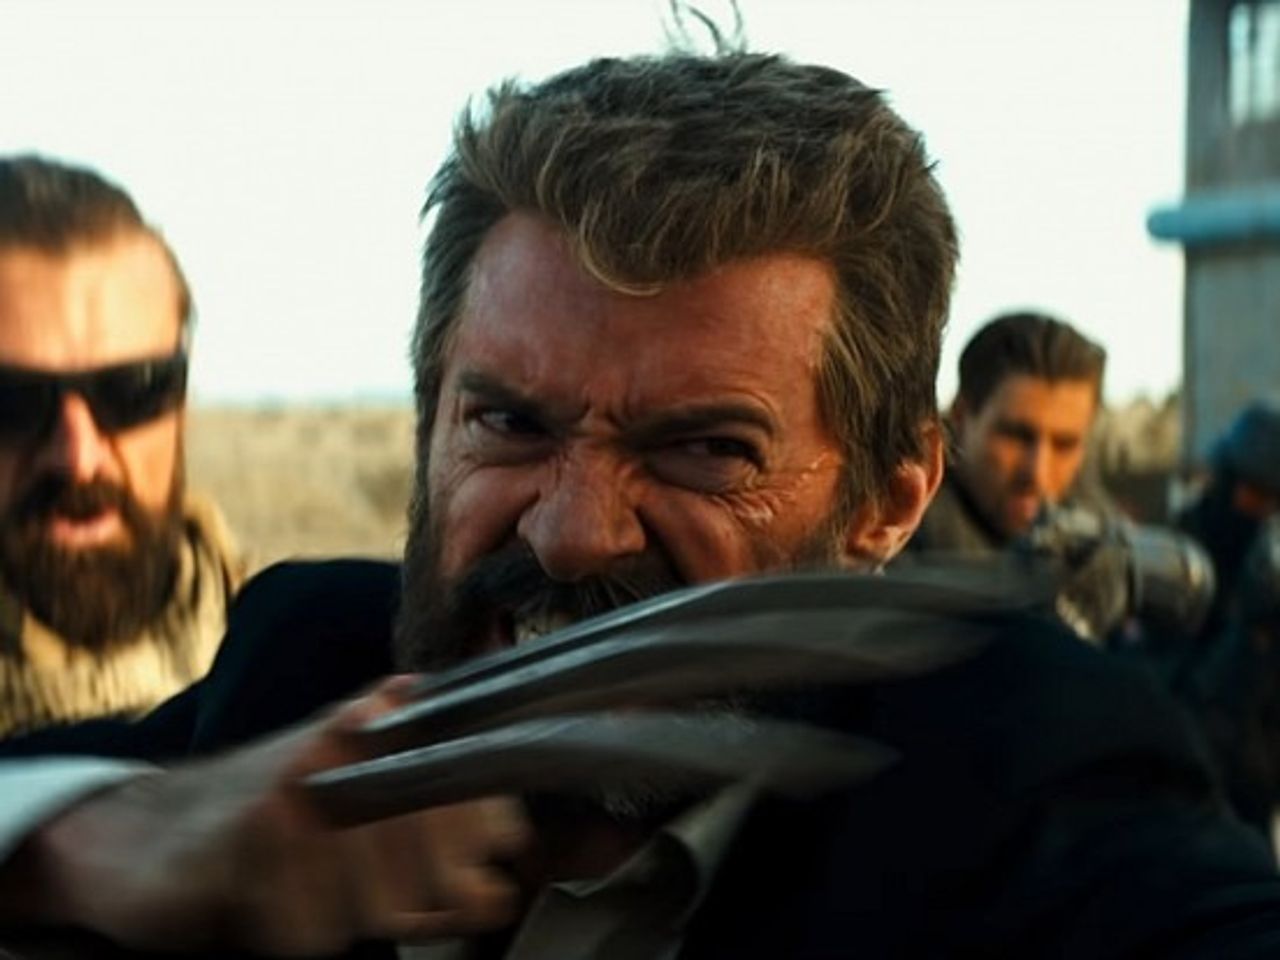 logan-has-the-biggest-march-opening-at-the-box-office-ever-for-an-r-rated-movie